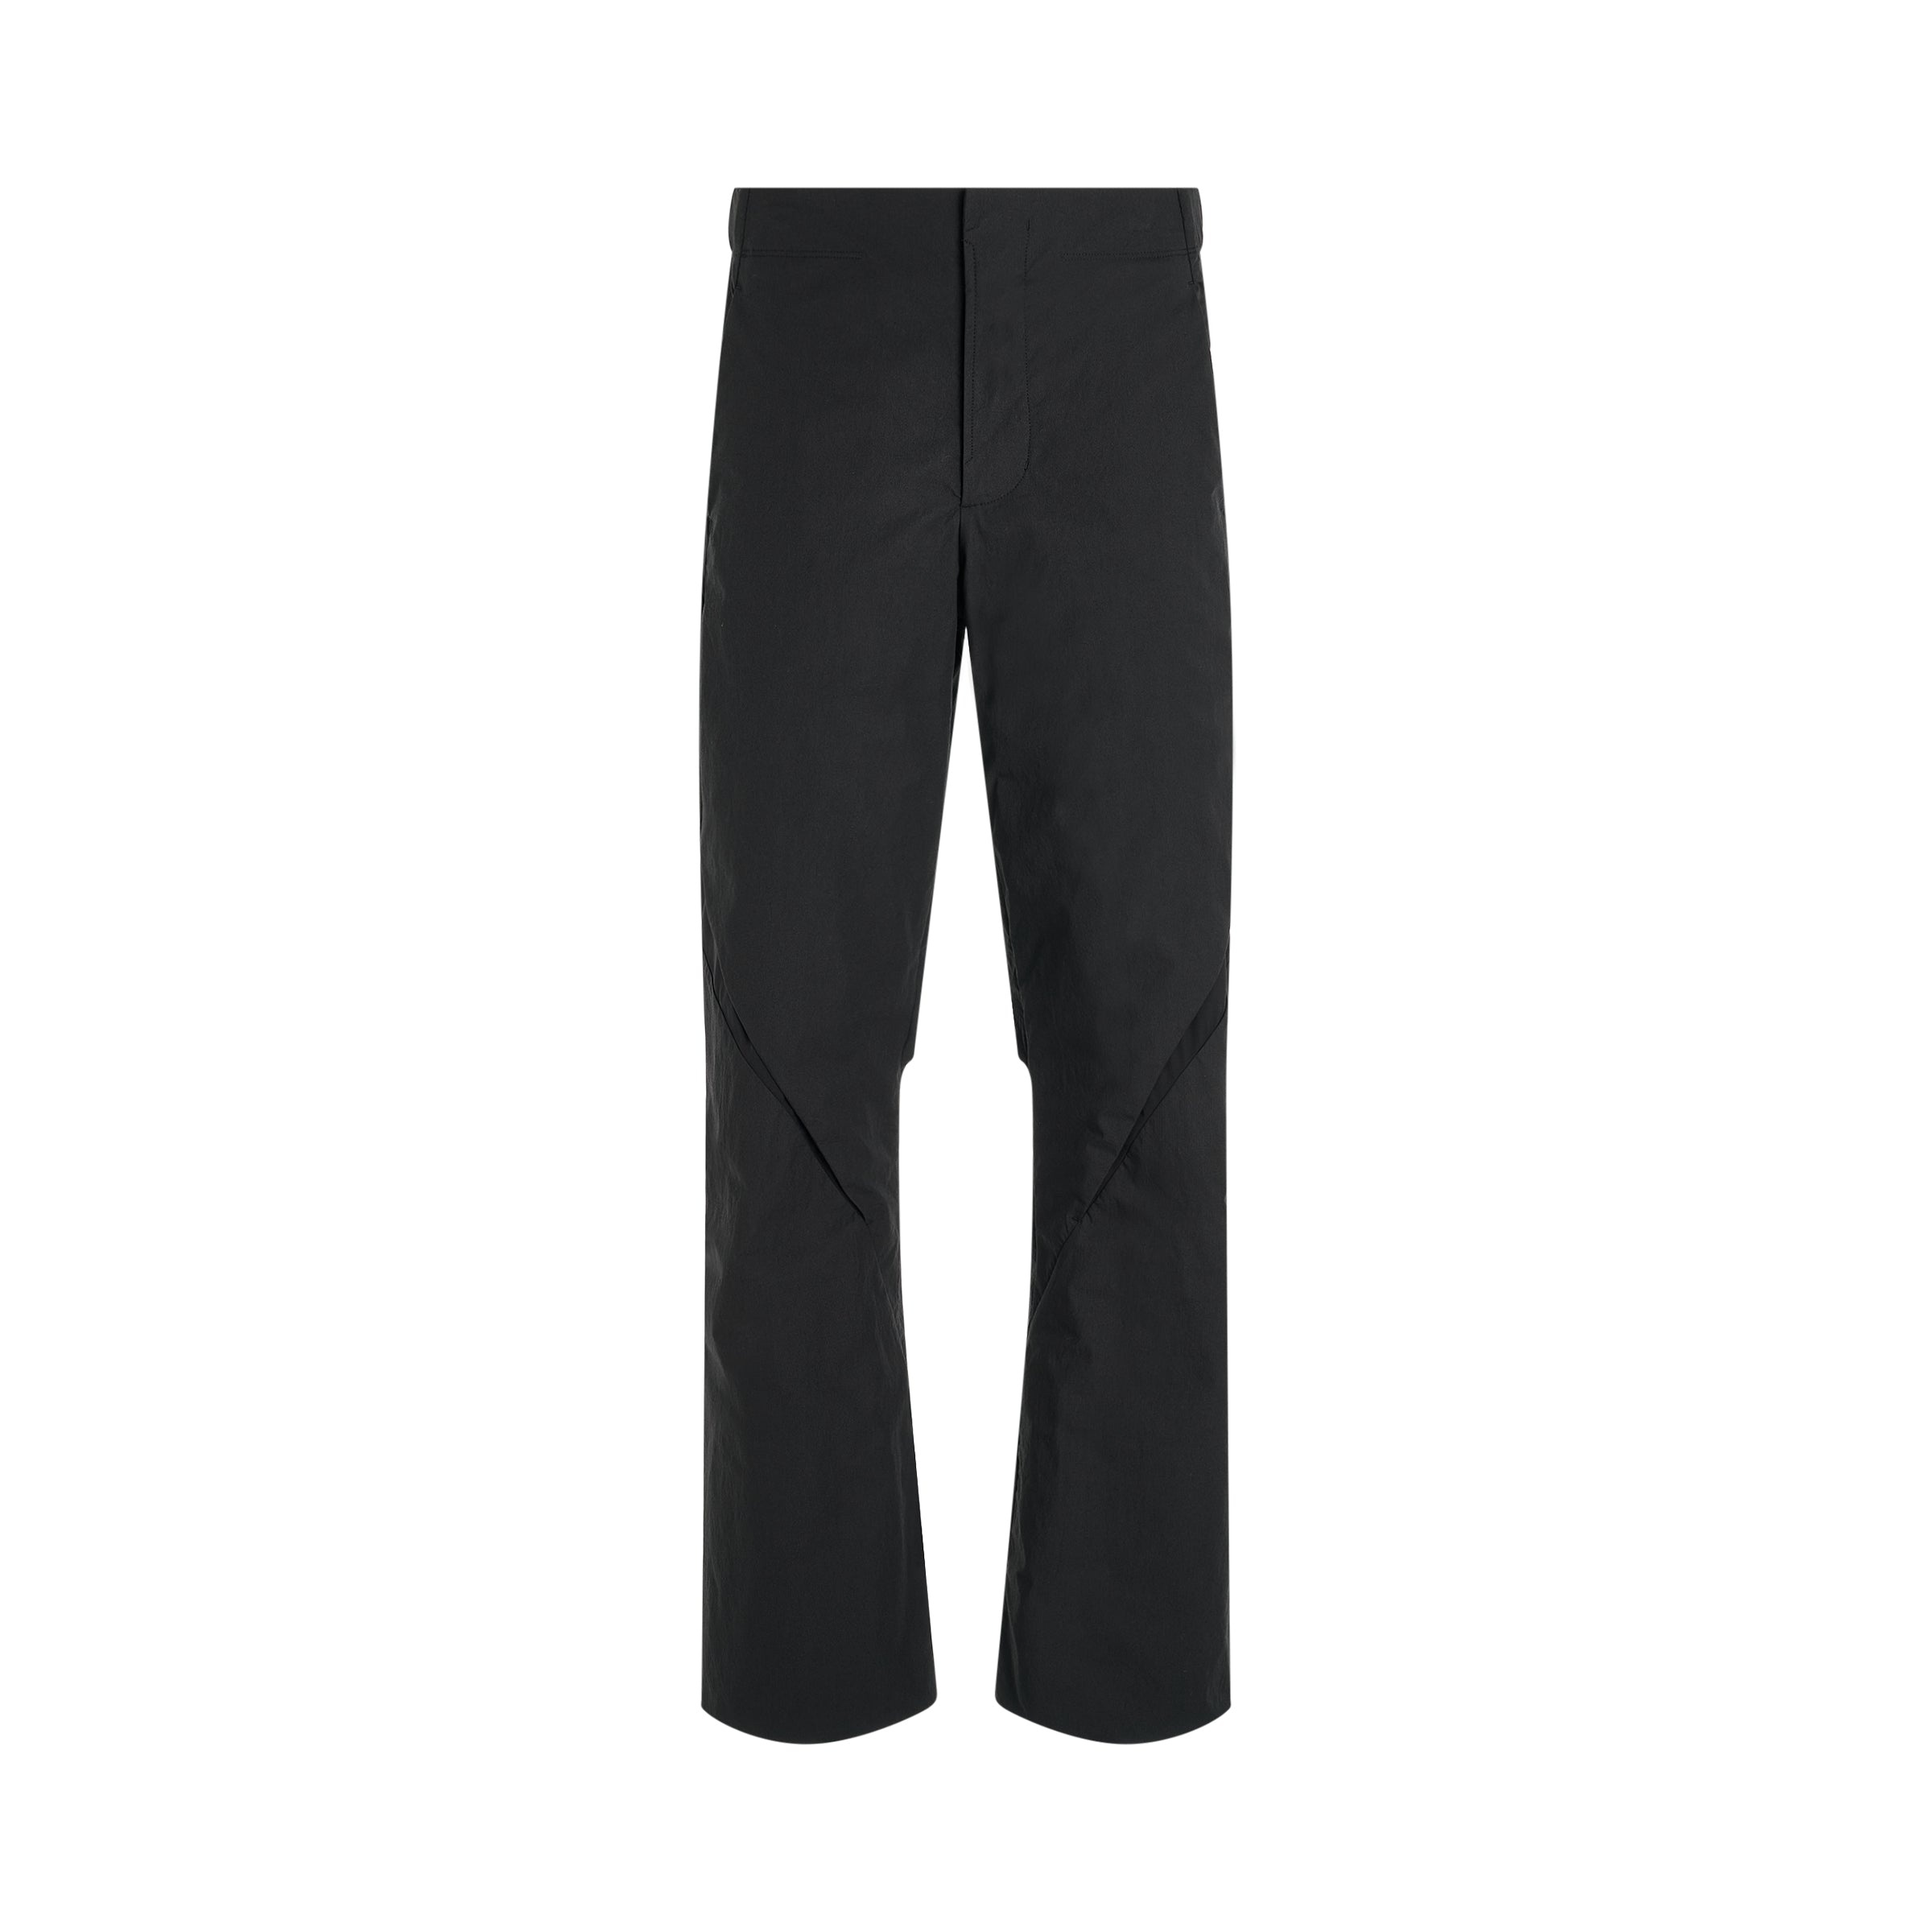 6.0 Technical Pants (Center) in Black - 1